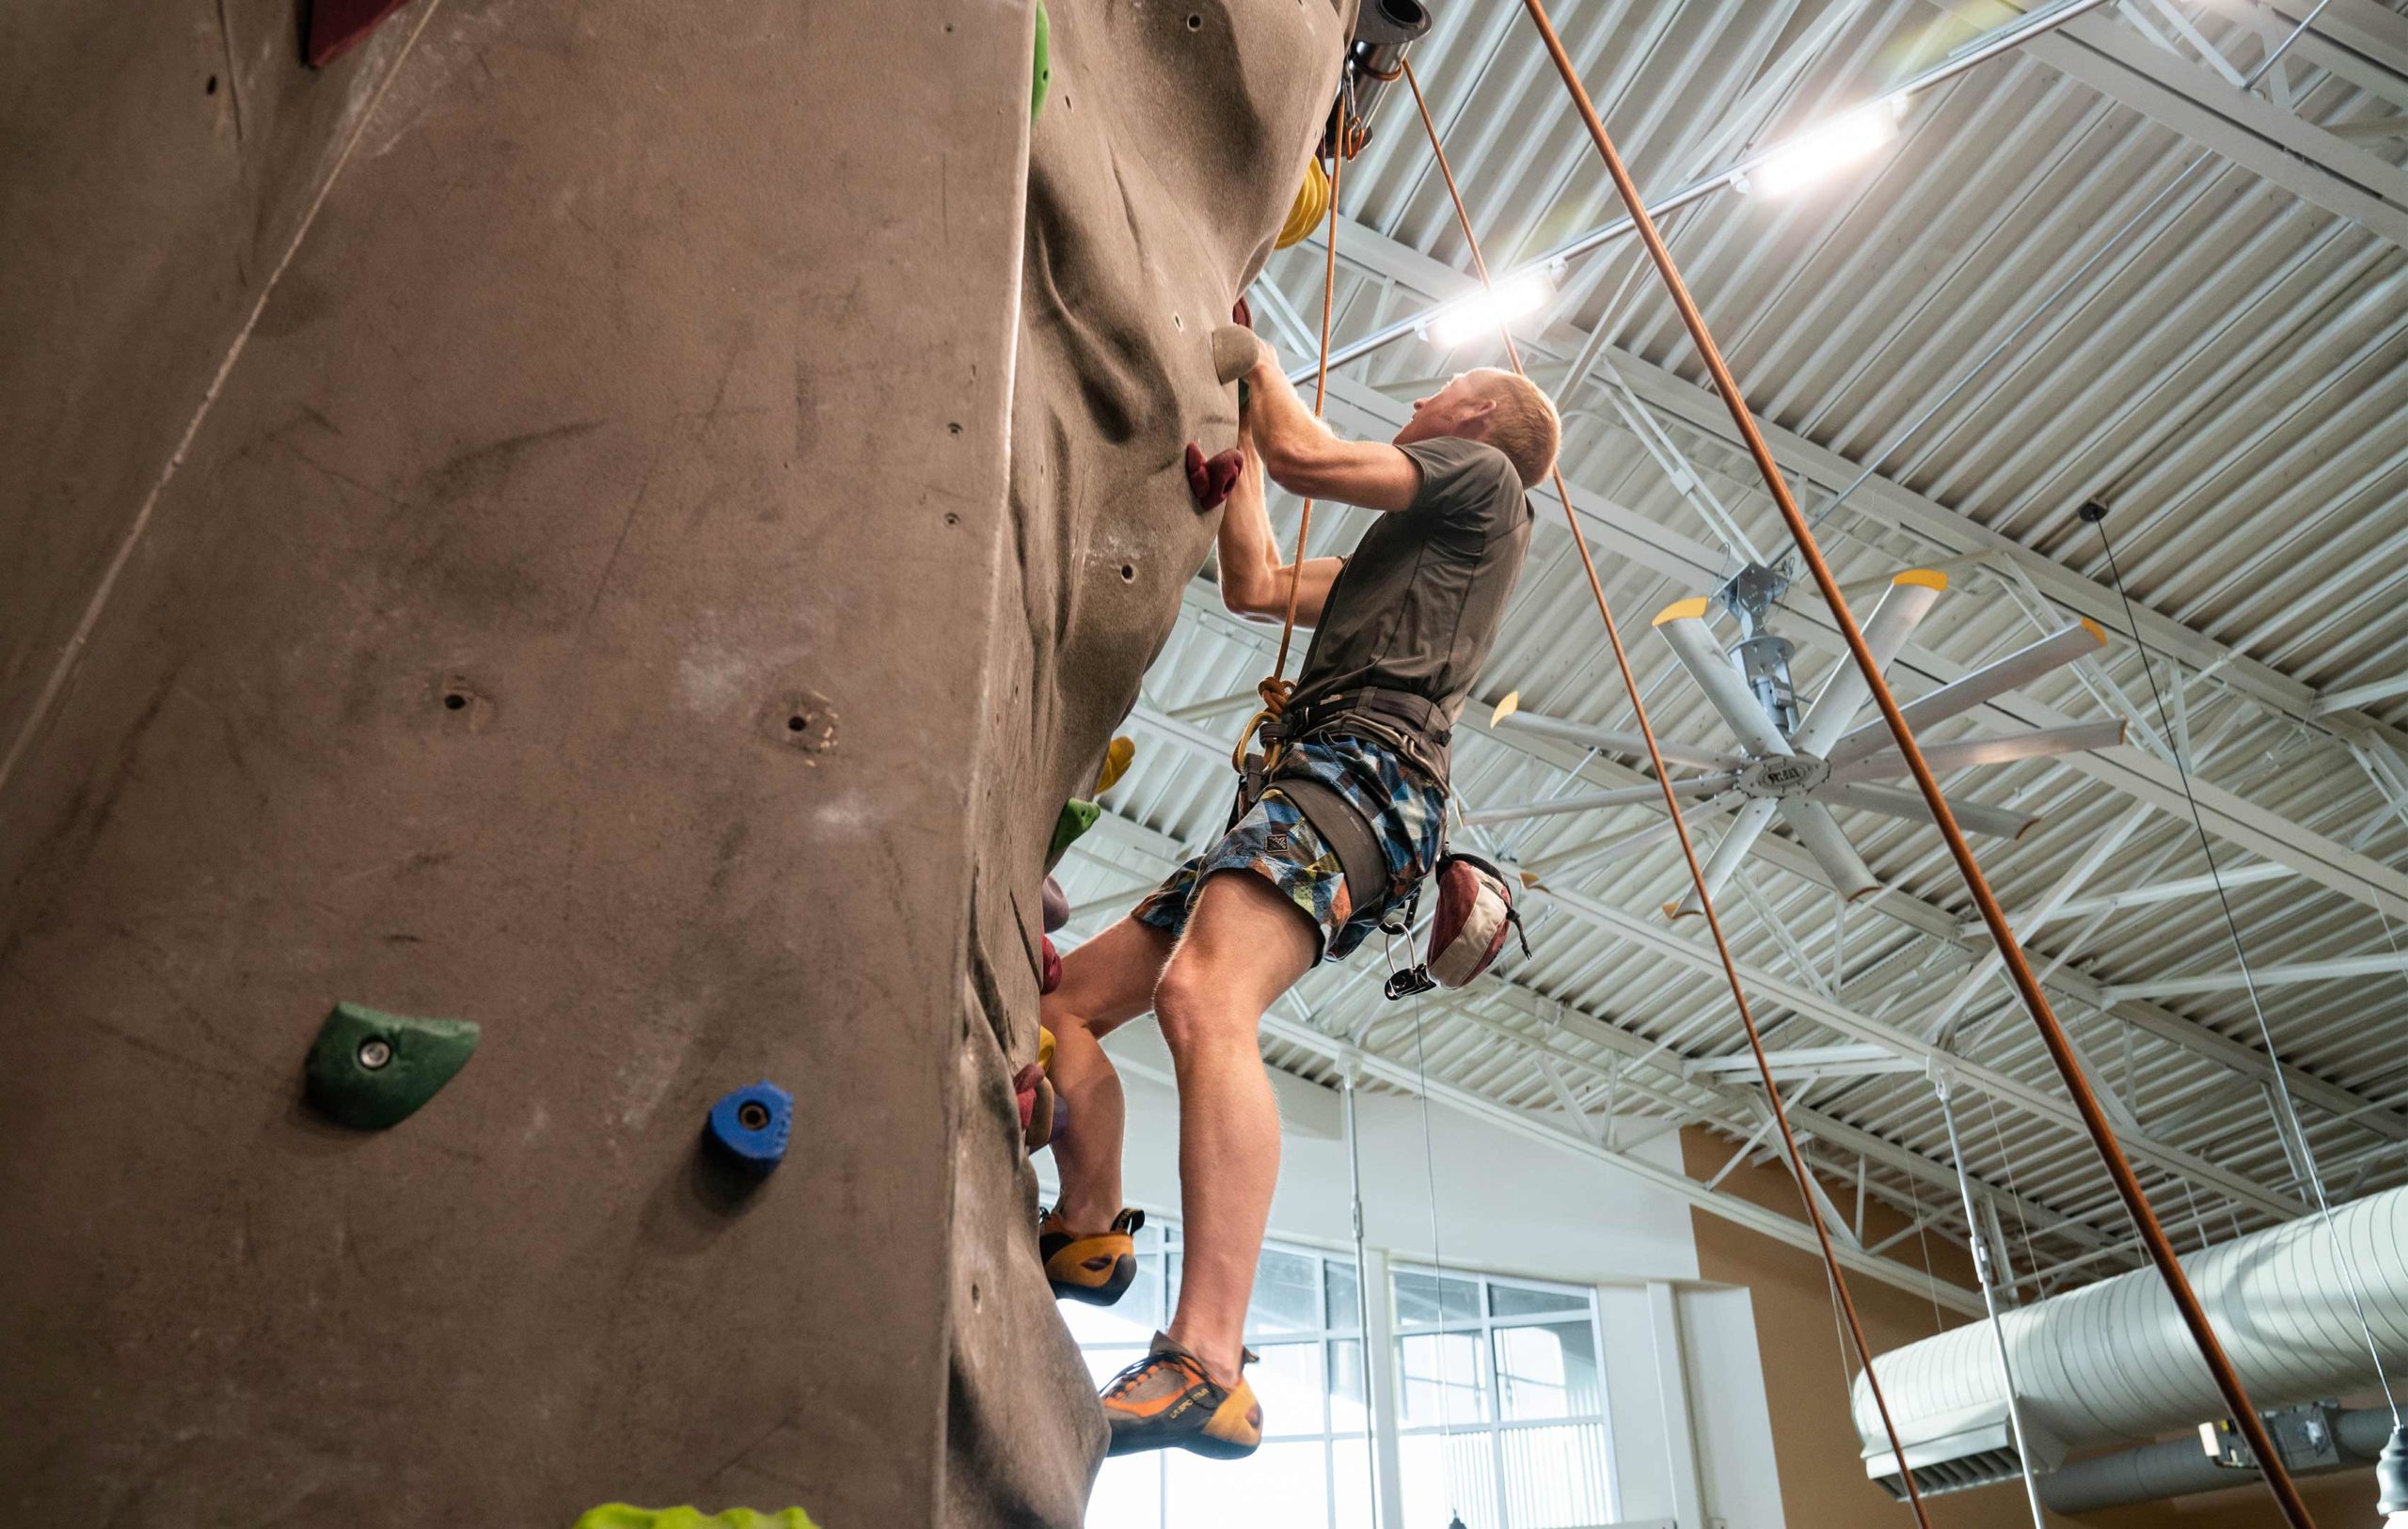 New-Thought-Visit-Pinedale-Wyoming-Ad-Photography-Man-Indoor-Rock-Climbing-At-Pinedale-Aquatic-Center-fullscreen